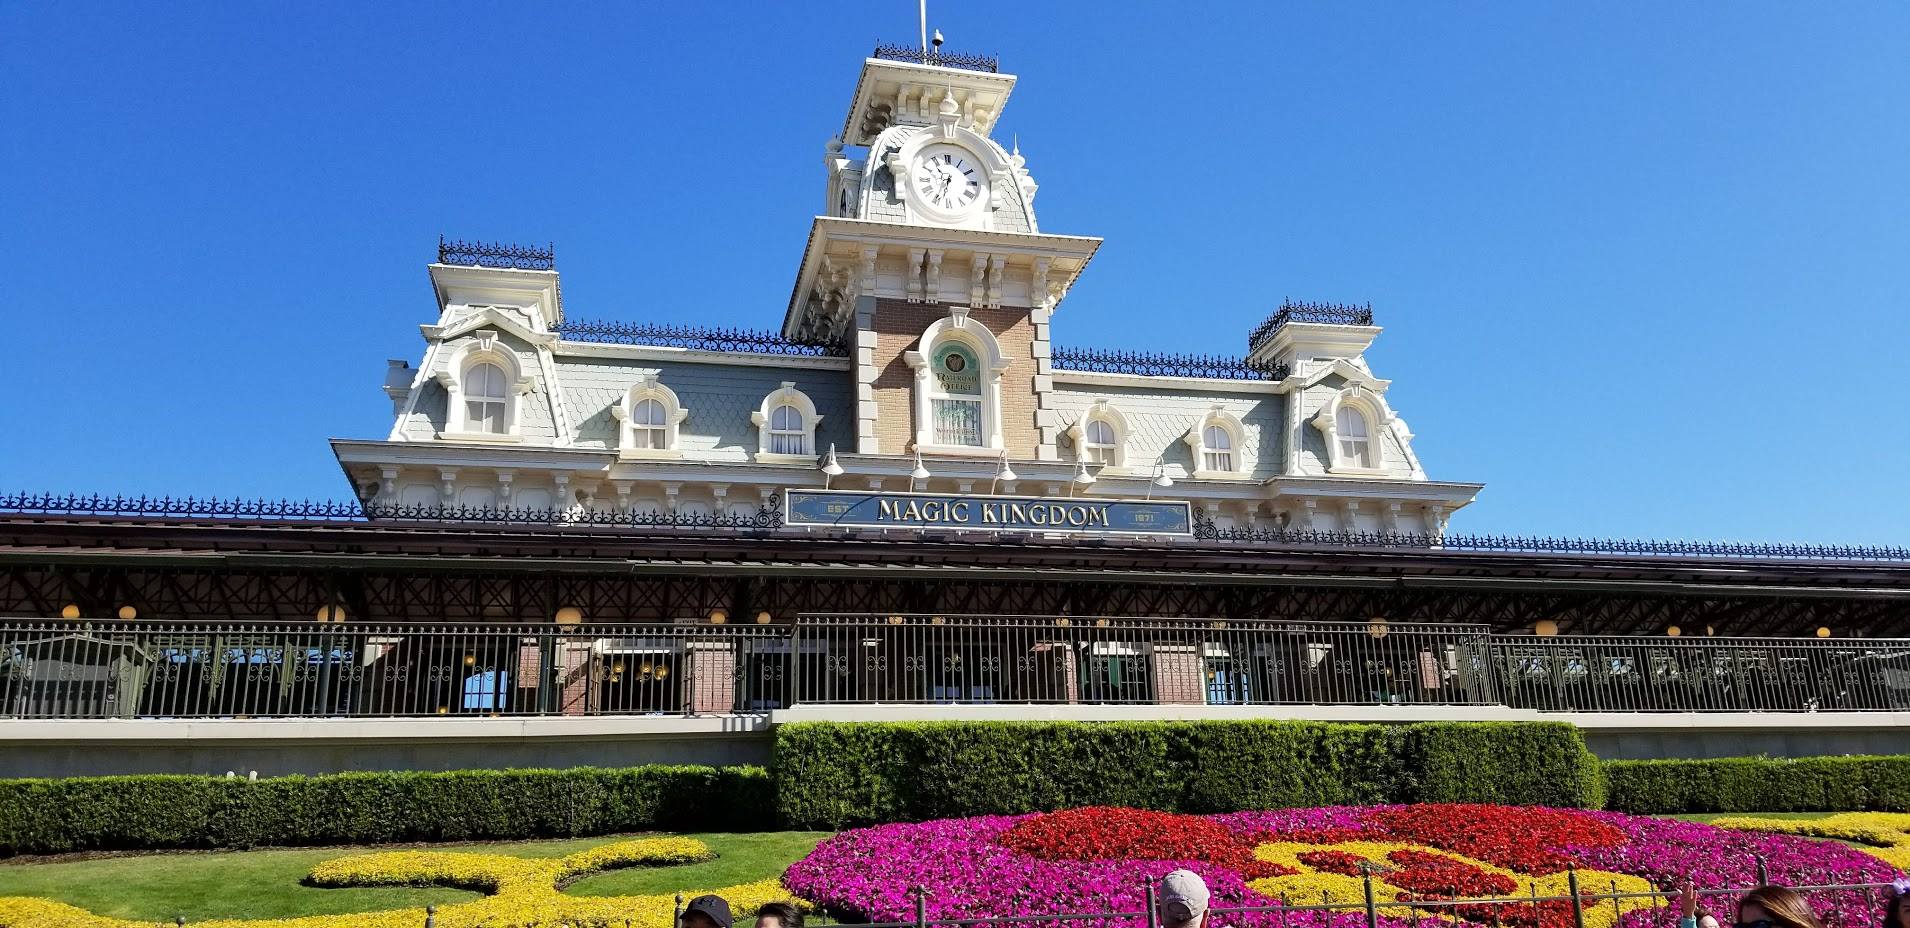 Walt Disney World Introduces 1-Day, 1-Park Ticket Available with Pre-Selected FastPasses